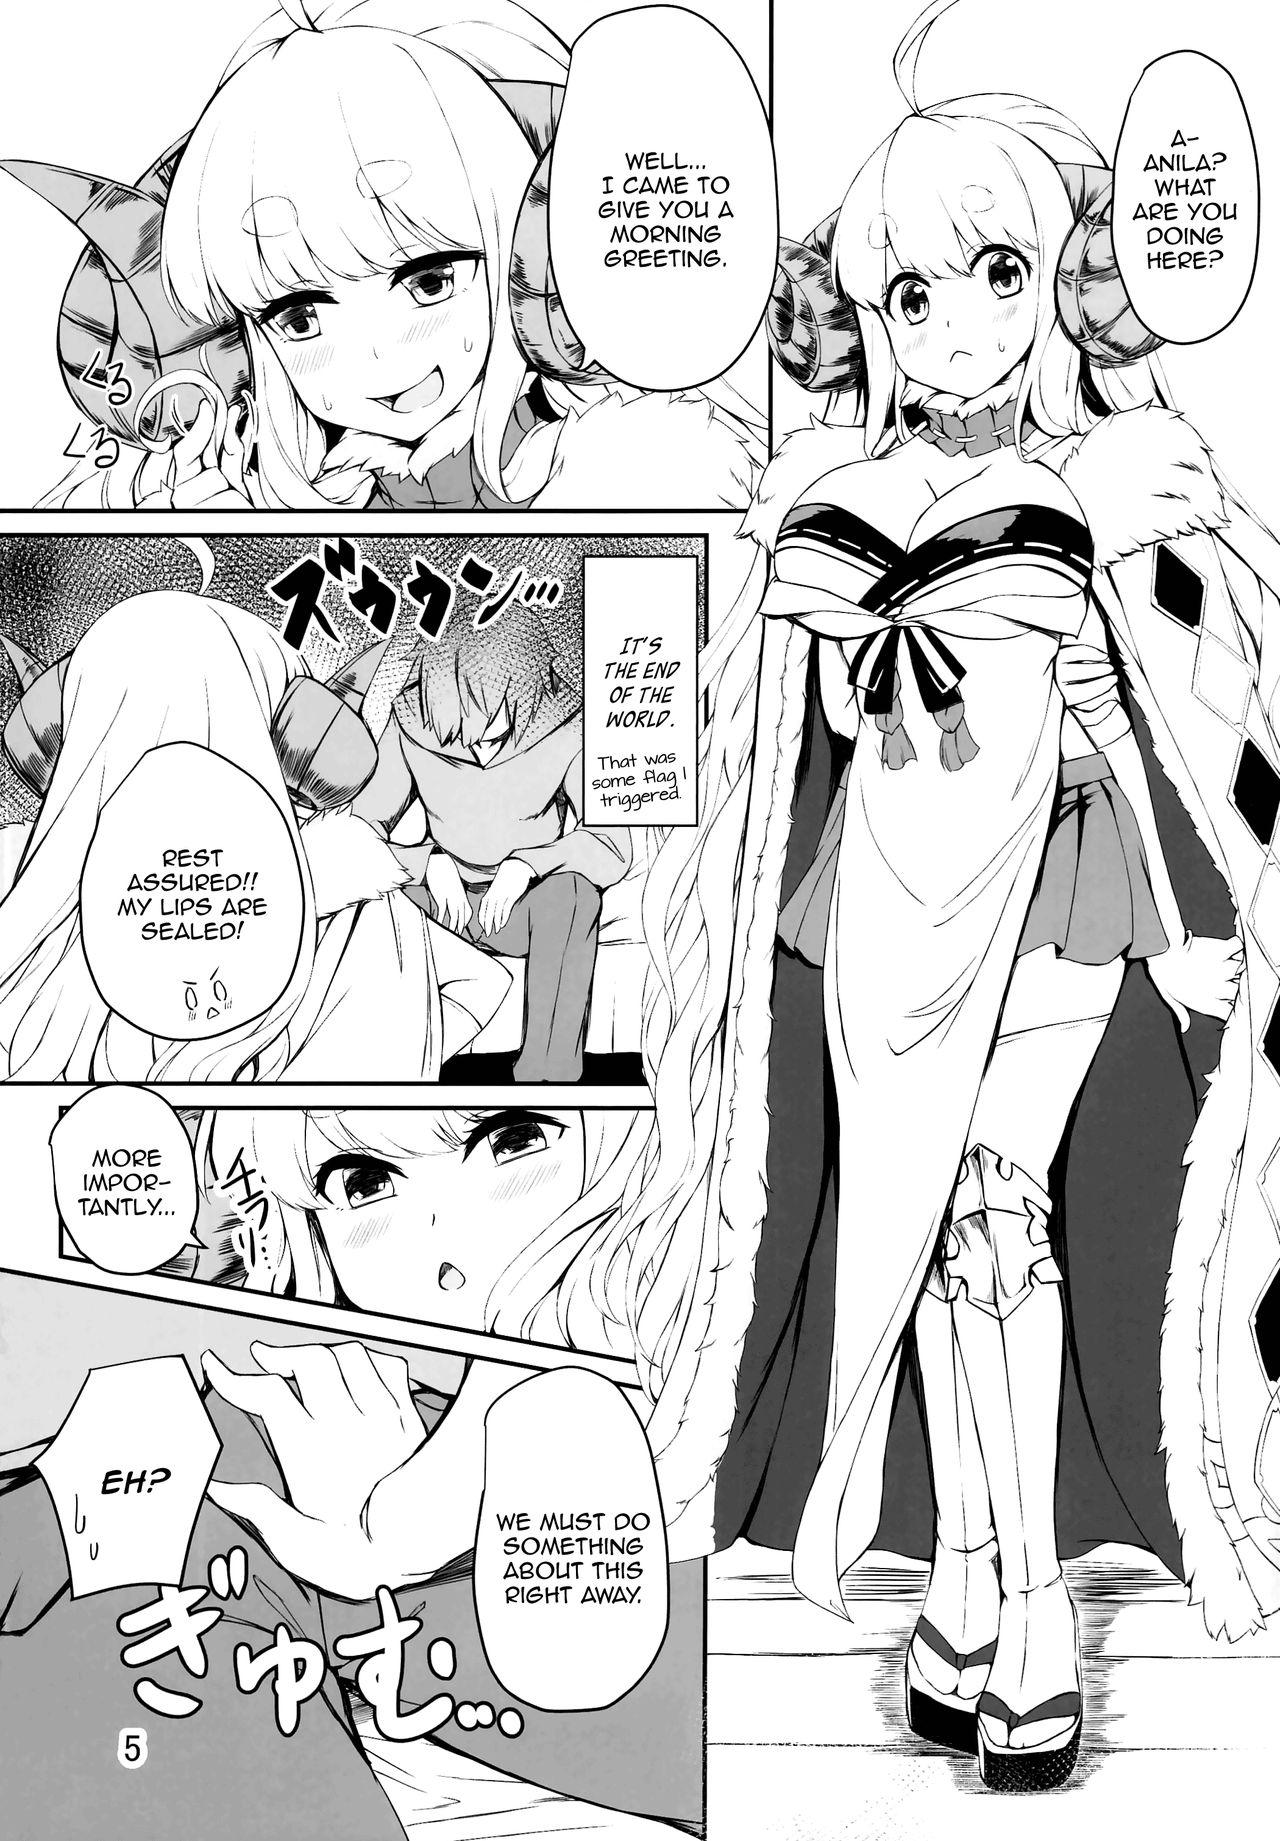 African Futari no Bonnou Hassan!! | Letting Out Their Desires!! - Granblue fantasy Step Fantasy - Page 5